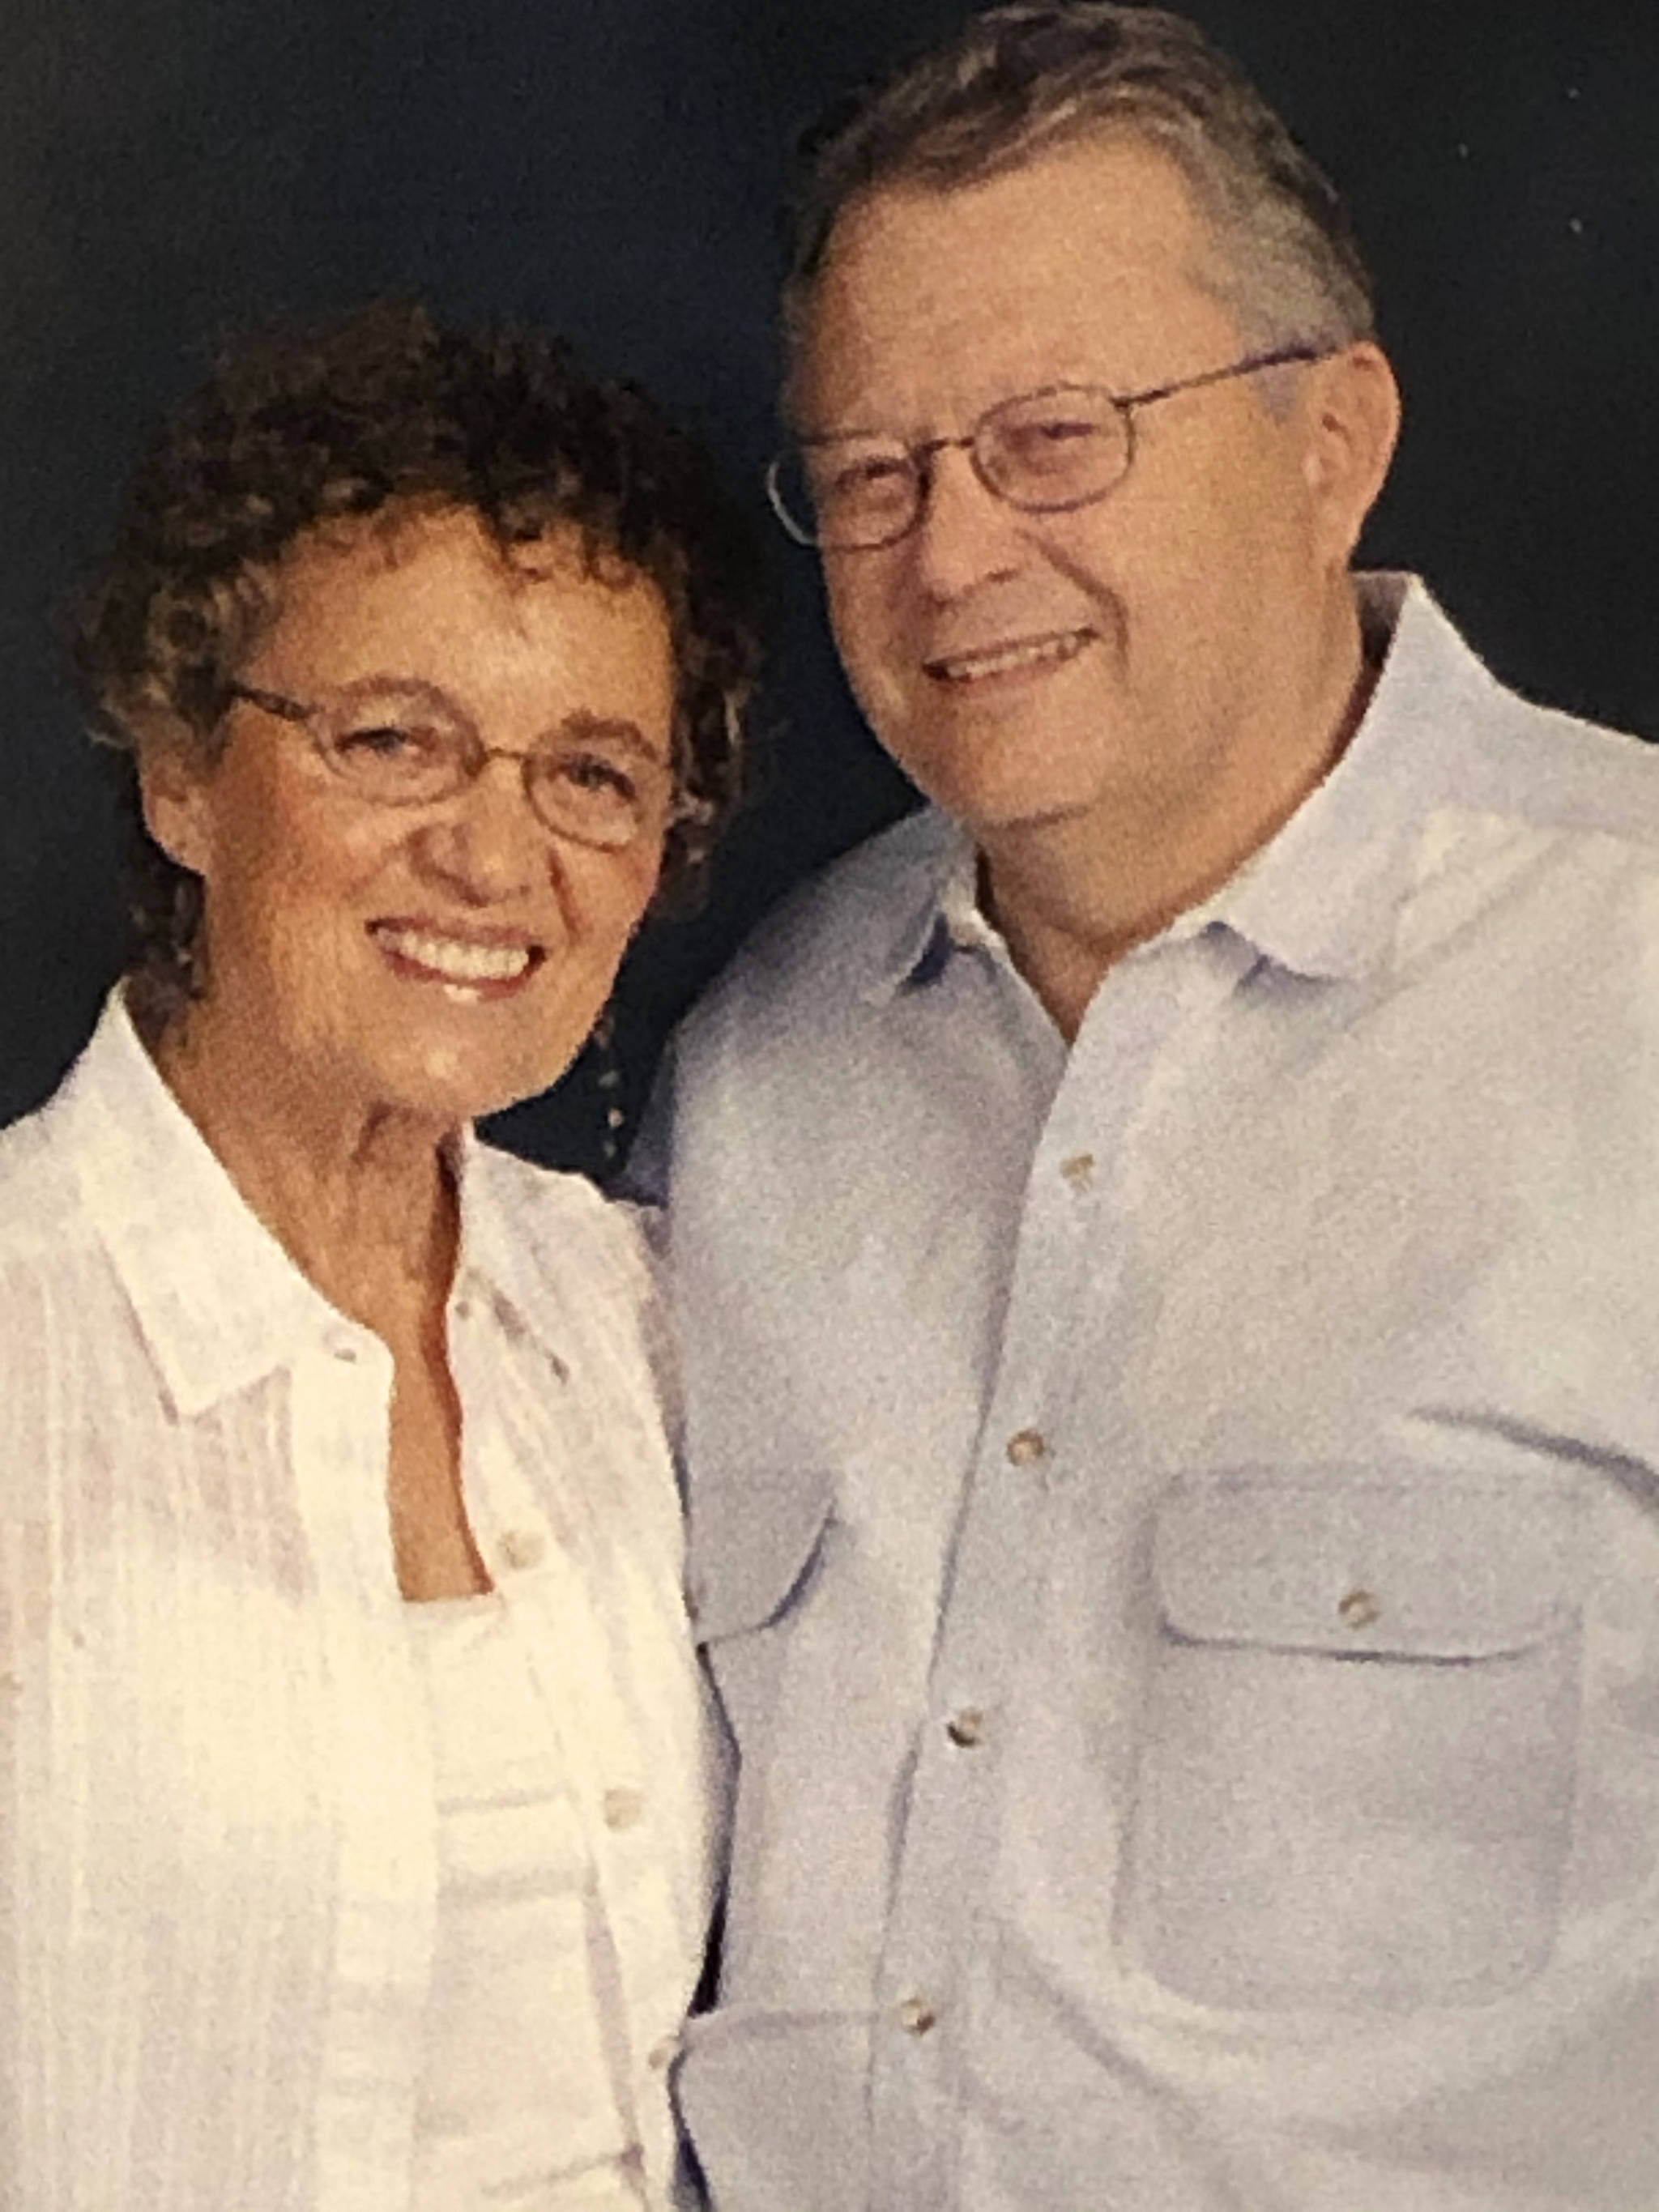 Photo courtesy of Greg Asimakoupoulos                                Tonette Snyder died earlier this year in July. She and Gary met while attending the University of Washington.